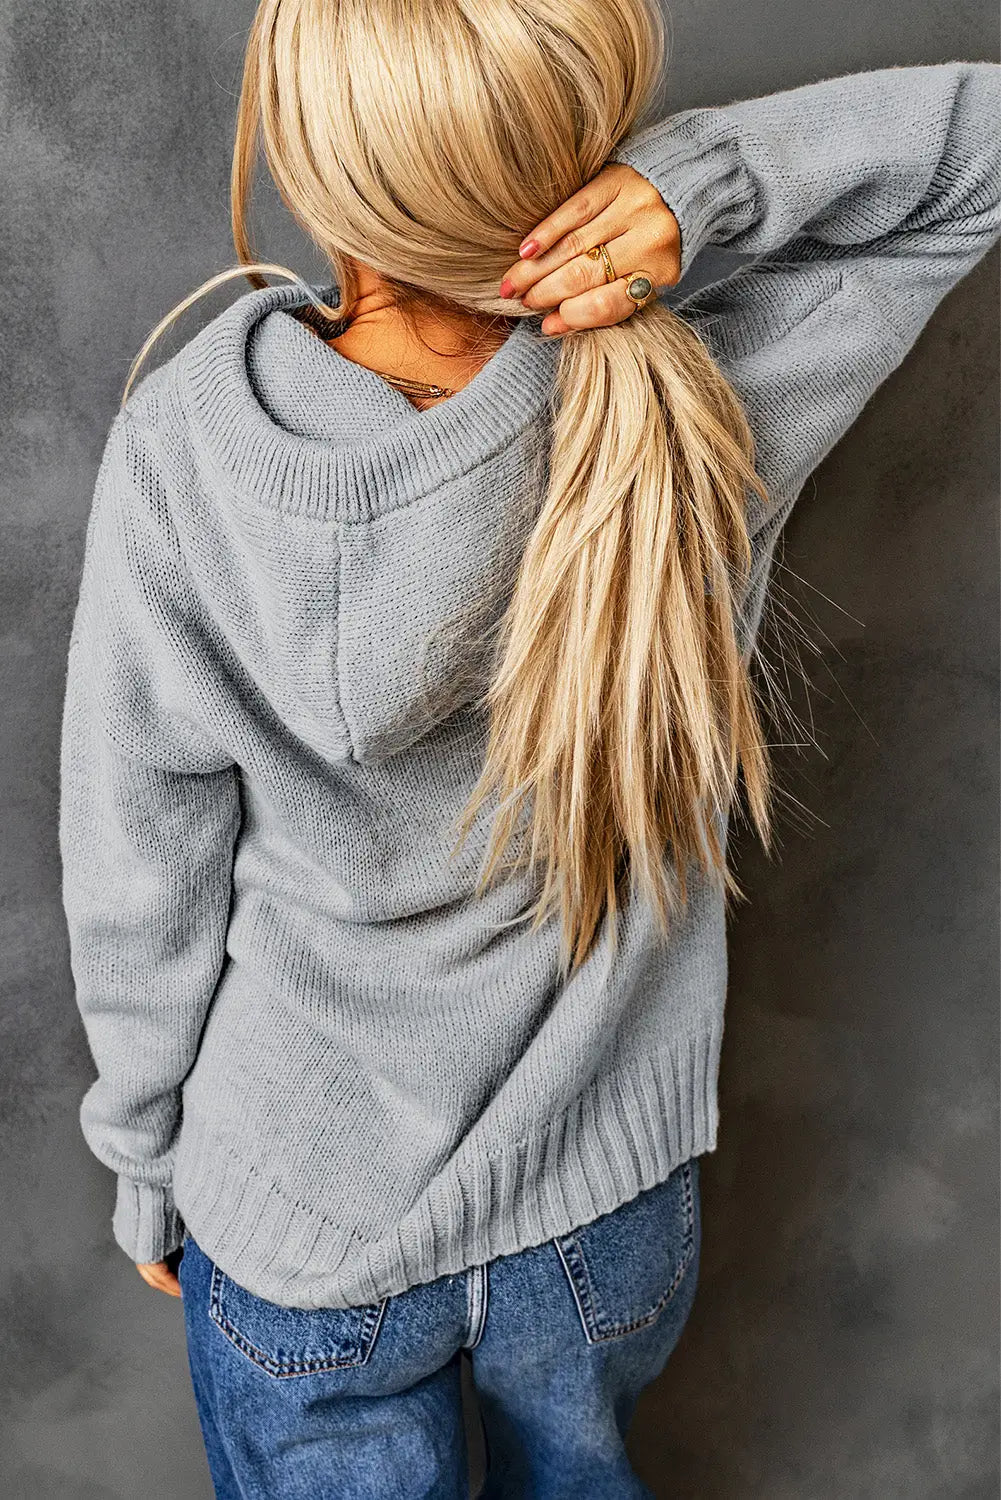 Gray kangaroo pocket cowl neck knitted sweater - sweaters & cardigans